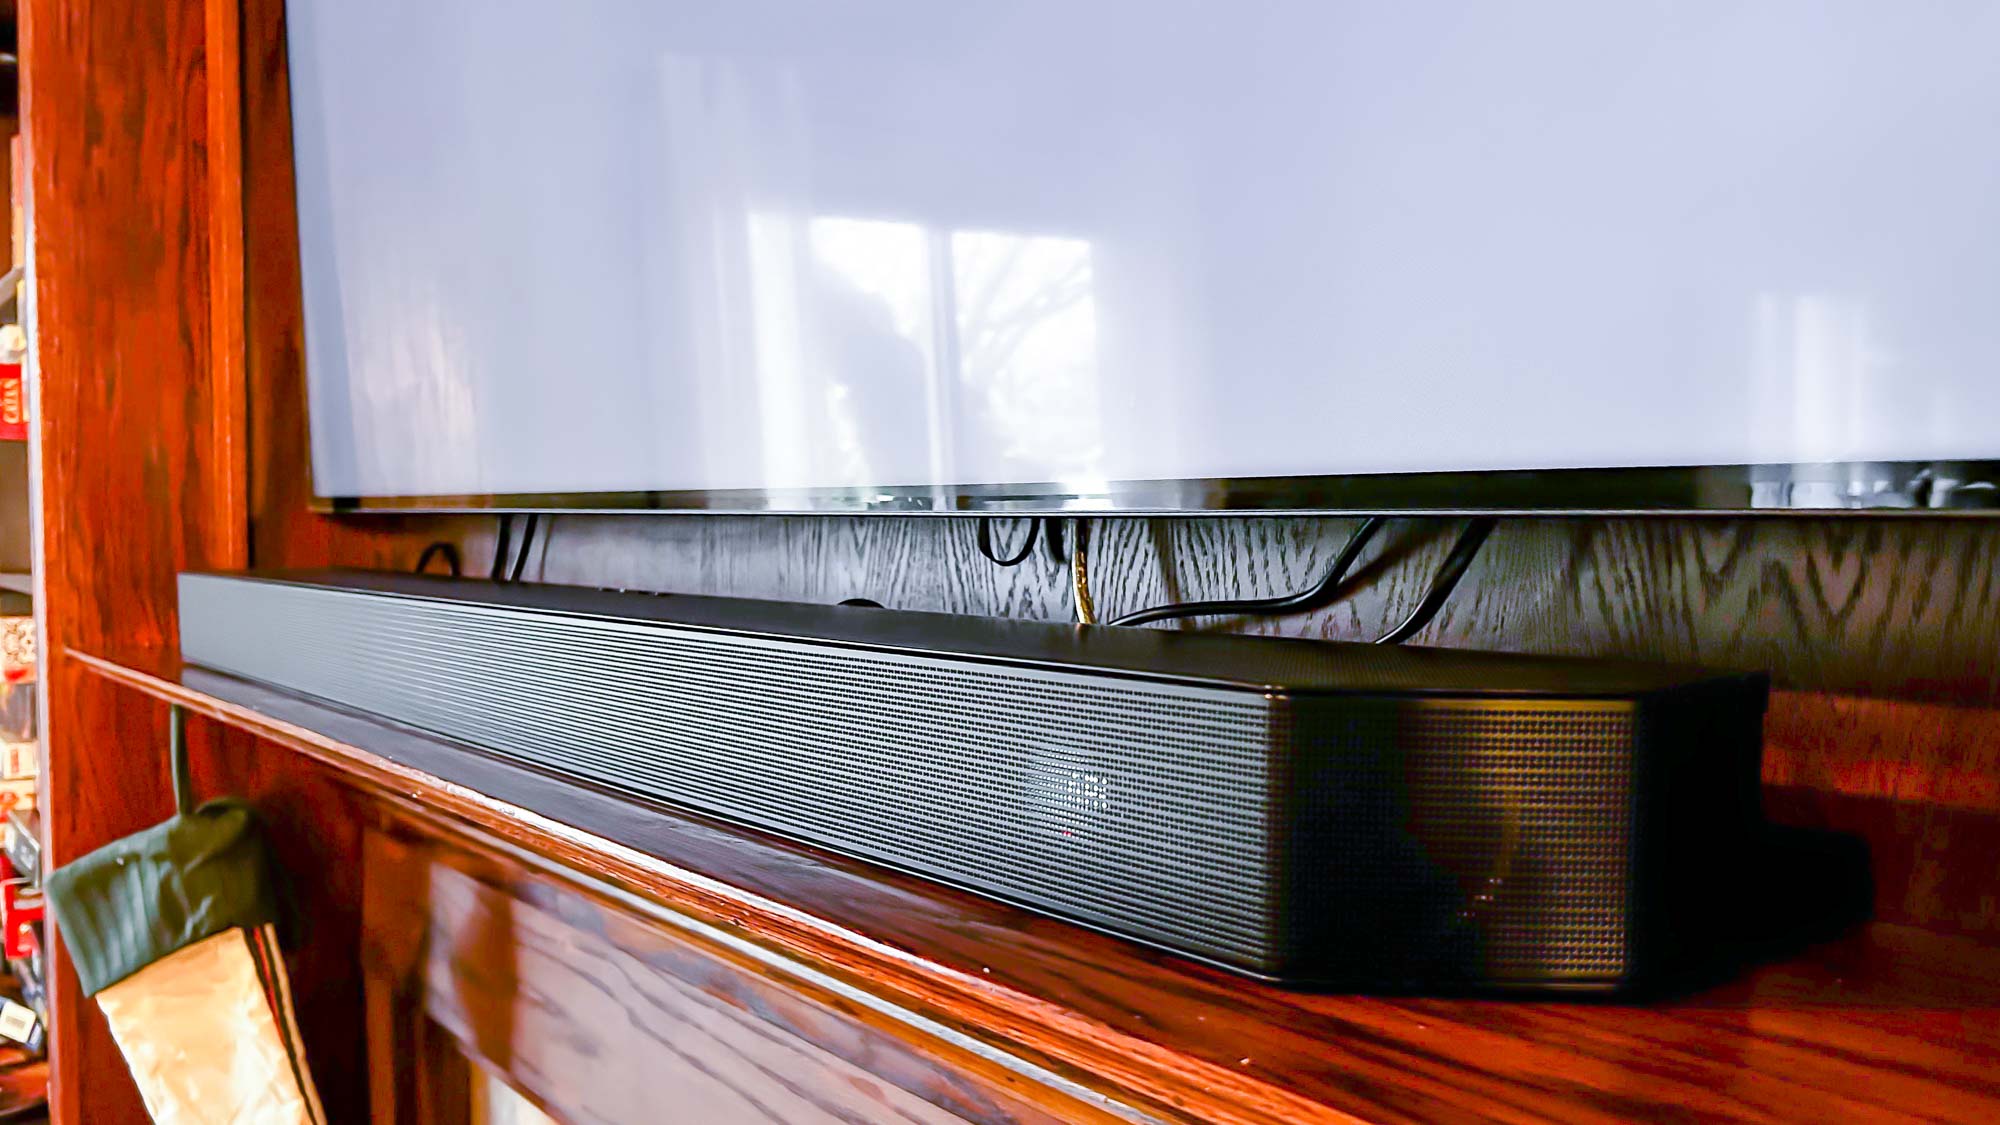 The 4 most important things to look for when buying a Dolby Atmos soundbar